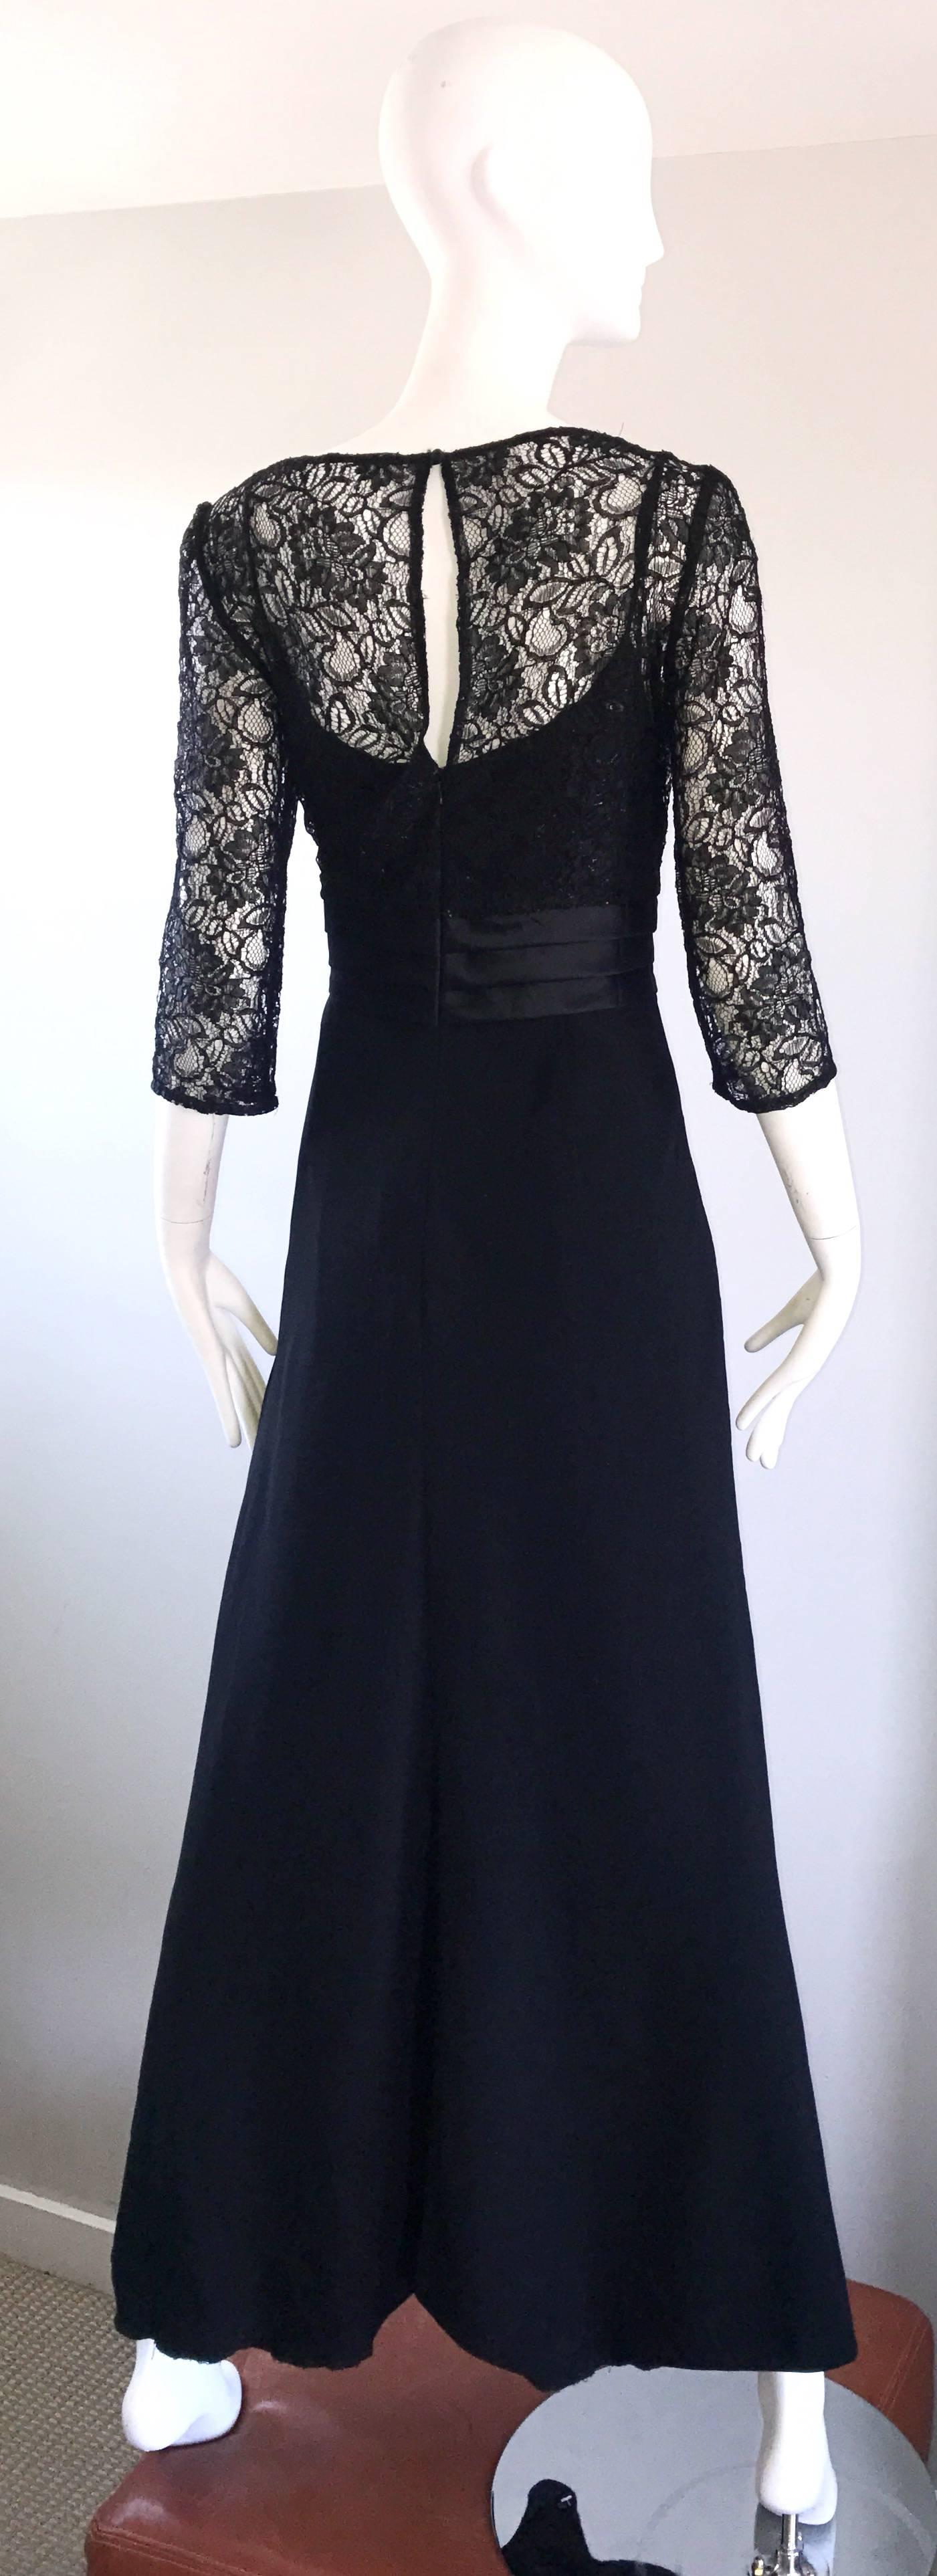 Badgley Mischka Beautiful Black Lace 3/4 Sleeves Size 8 Vintage Gown ...